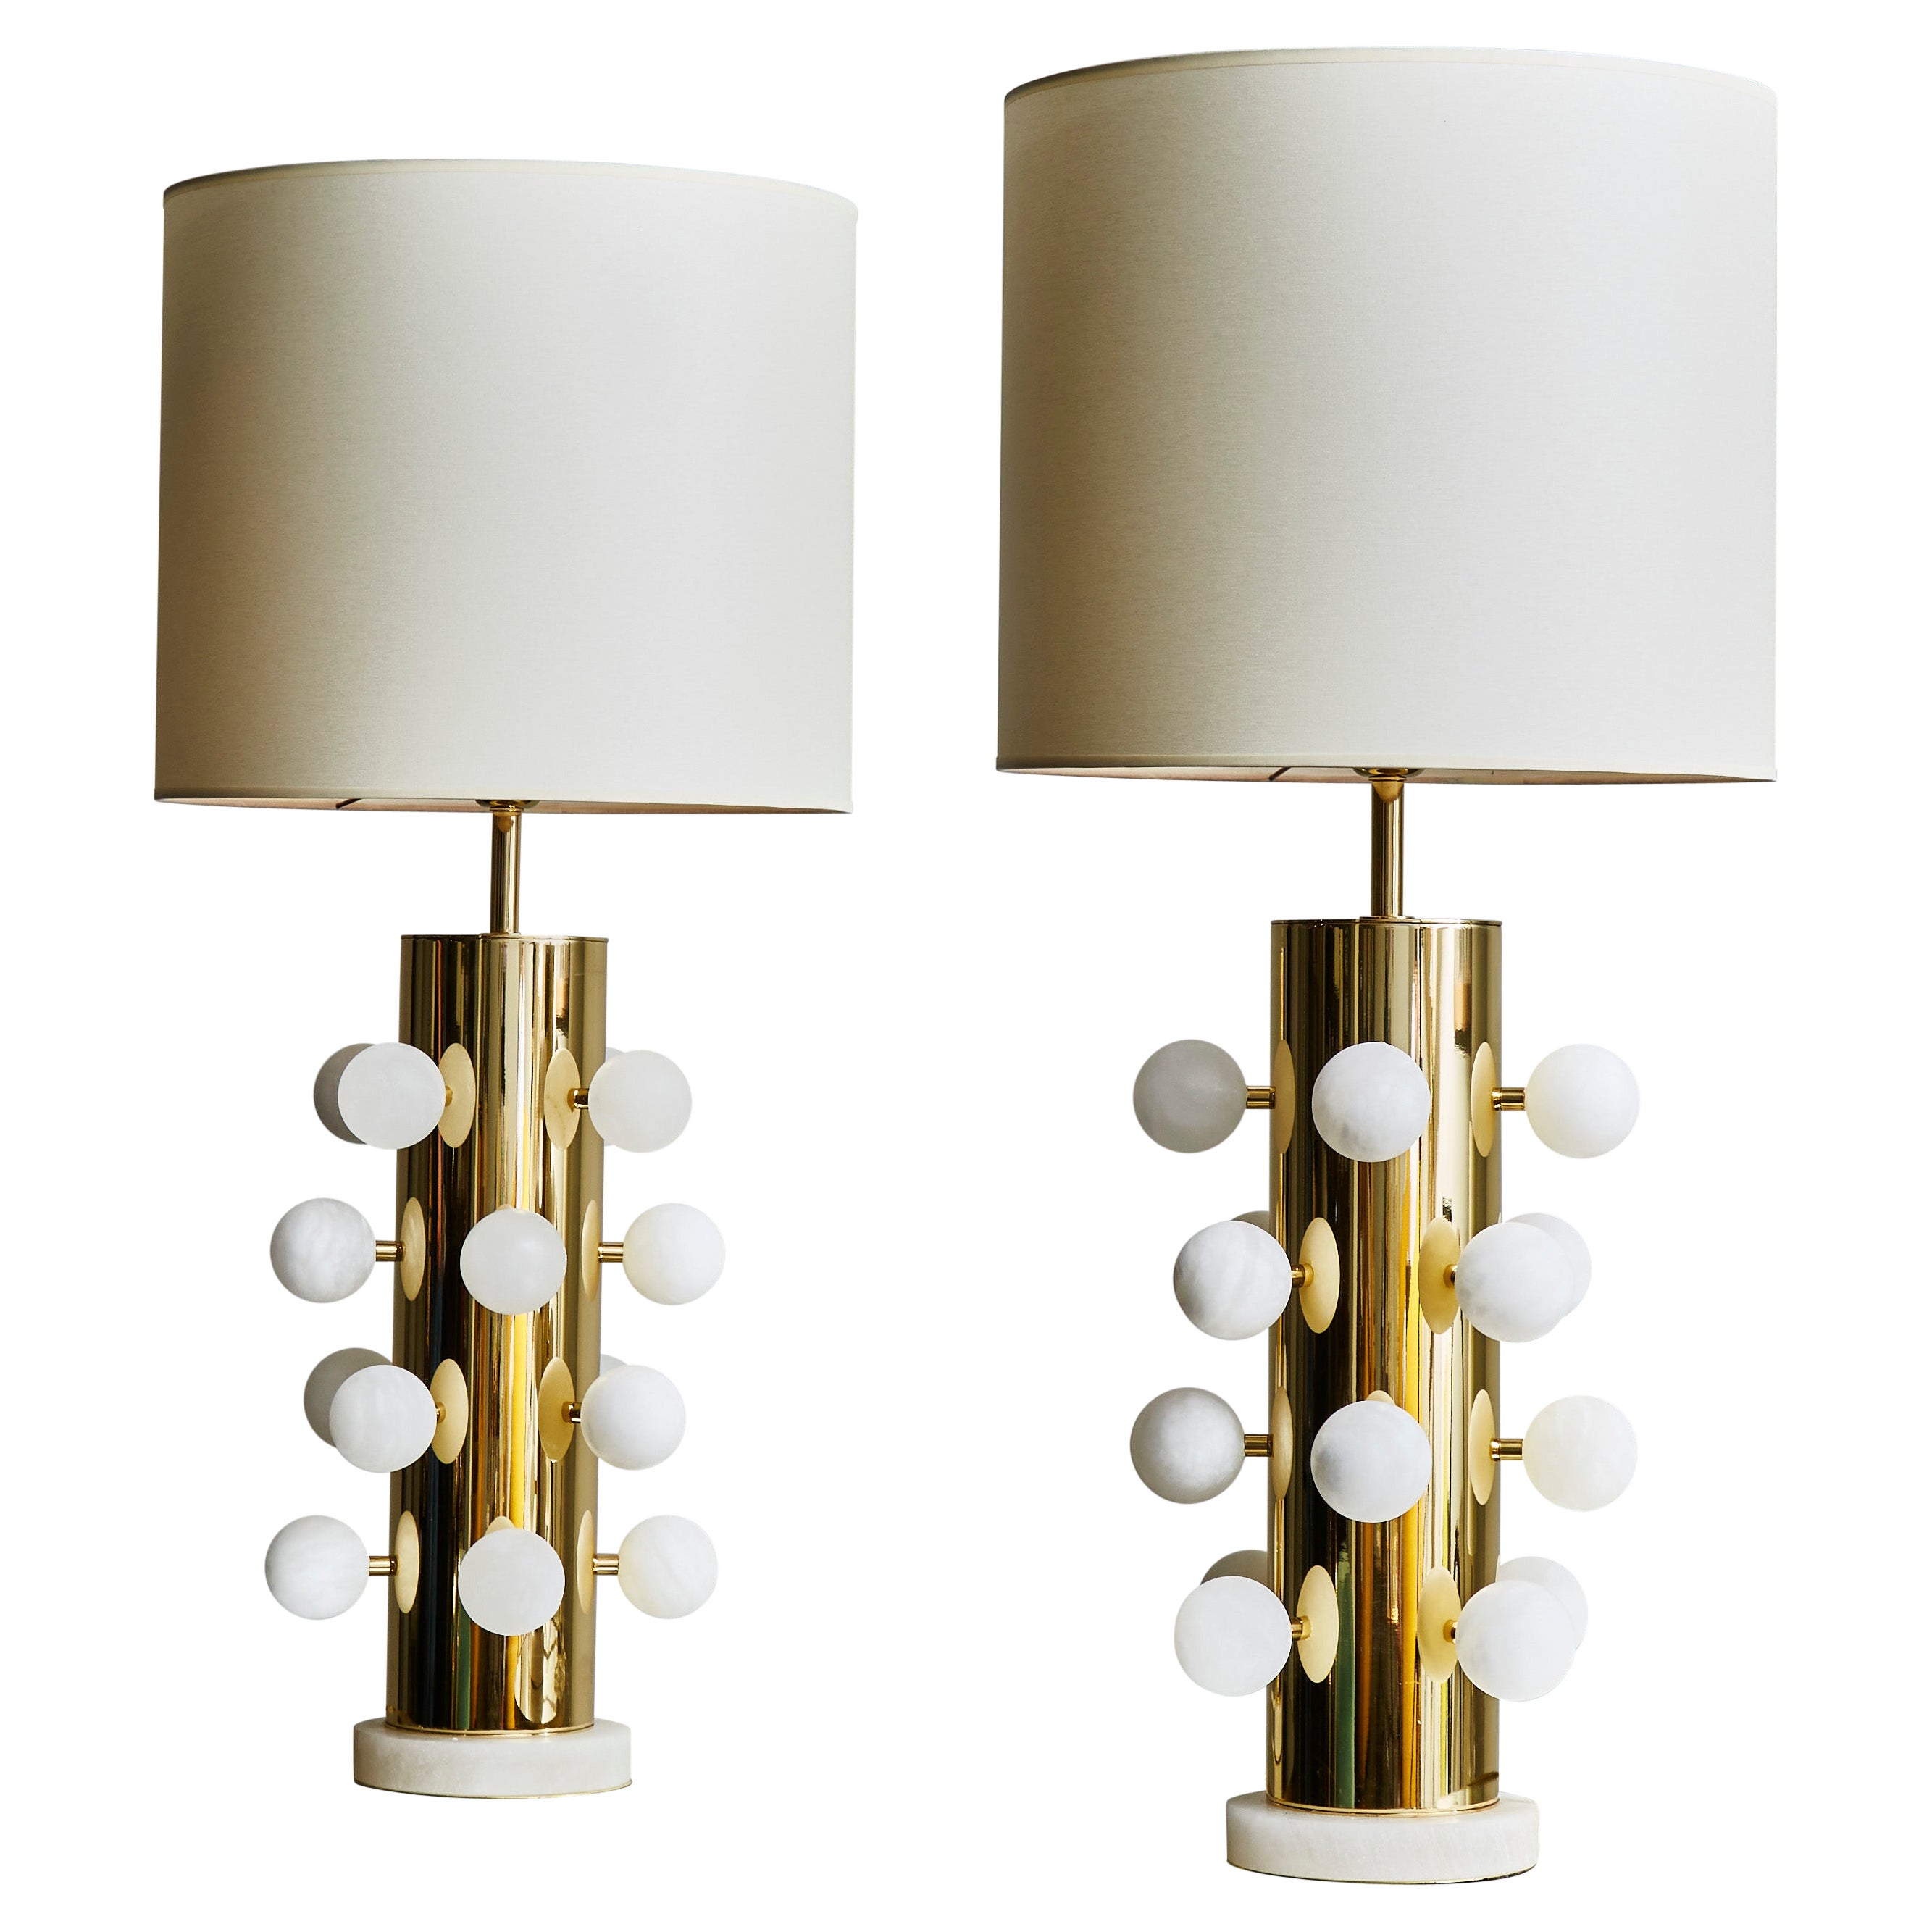 Pair of Polished Brass Table Lamps with Alabaster Spheres